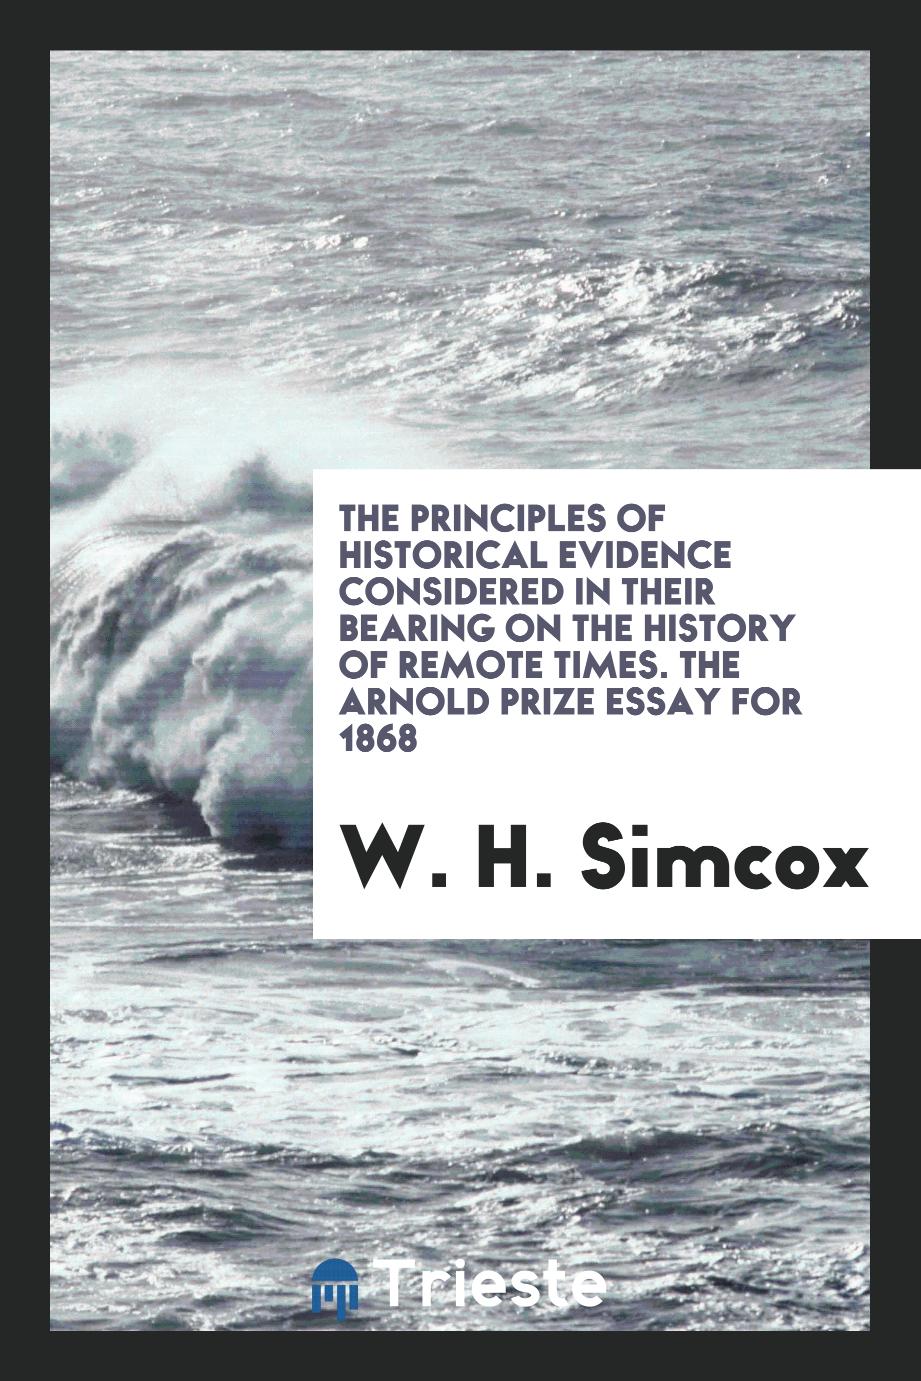 The Principles of Historical Evidence Considered in Their Bearing on the history of remote times. The Arnold prize essay for 1868